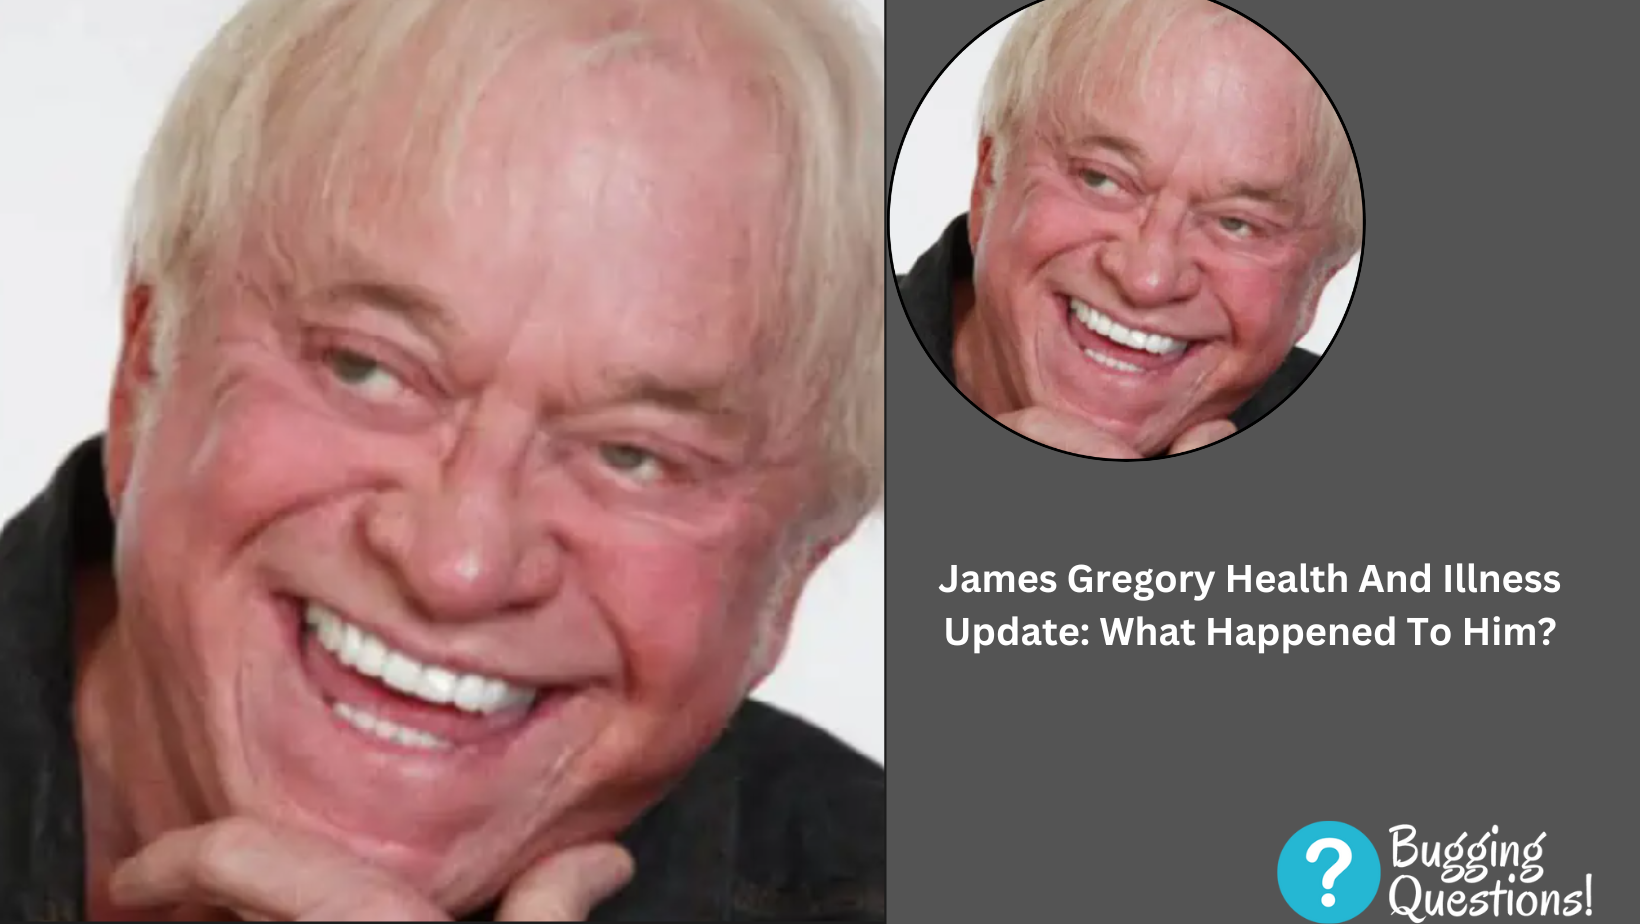 James Gregory Health And Illness Update